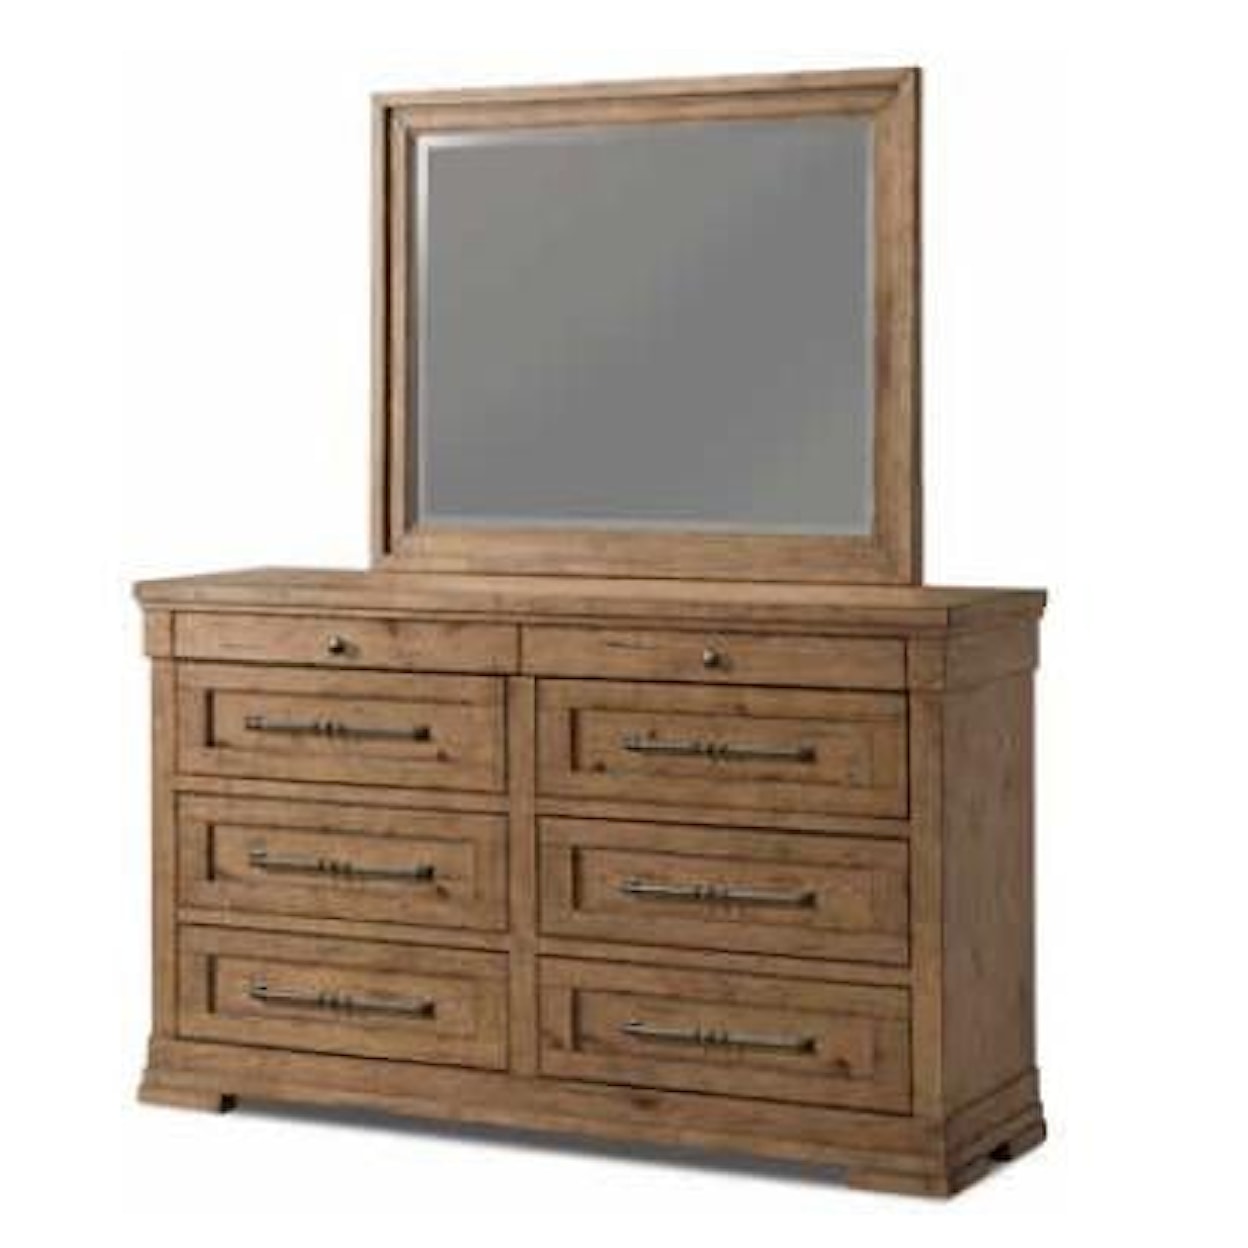 Trisha Yearwood Home Collection by Legacy Classic Coming Home Dresser and Mirror